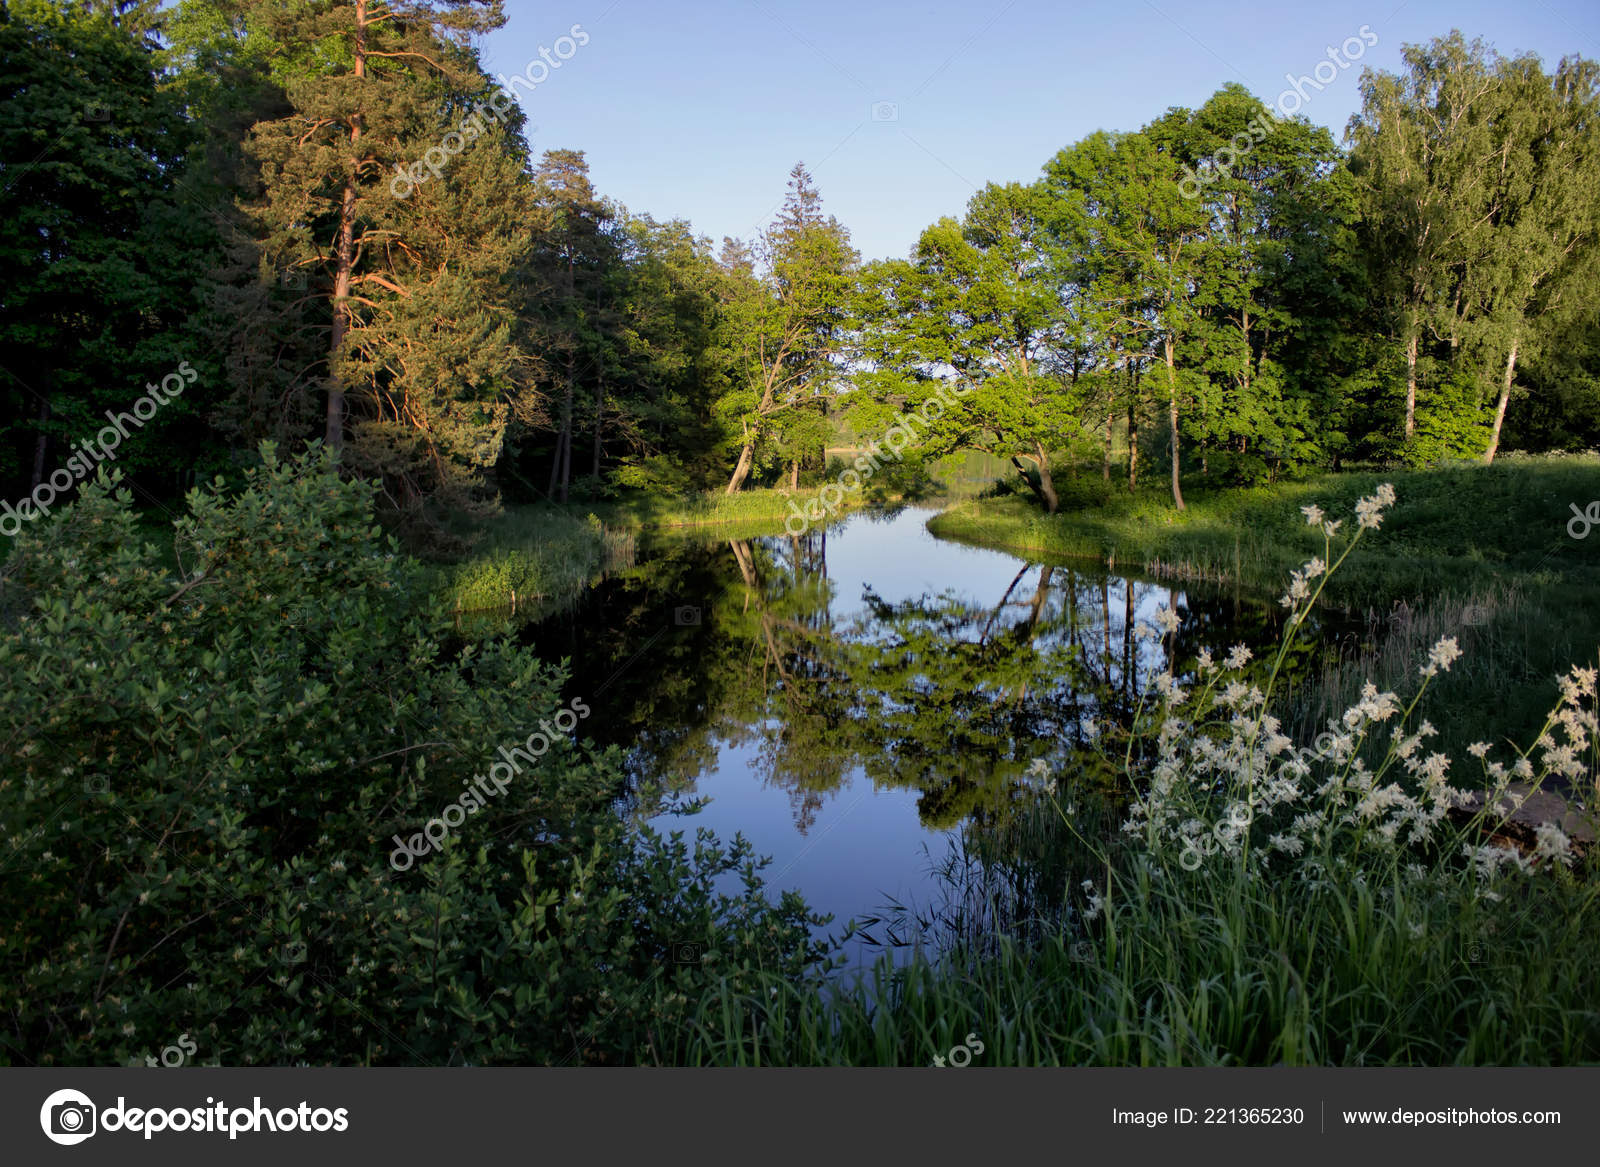 Peaceful Nature Scene Clear Pond Surrounded Forest Stock Photo C Dariaren